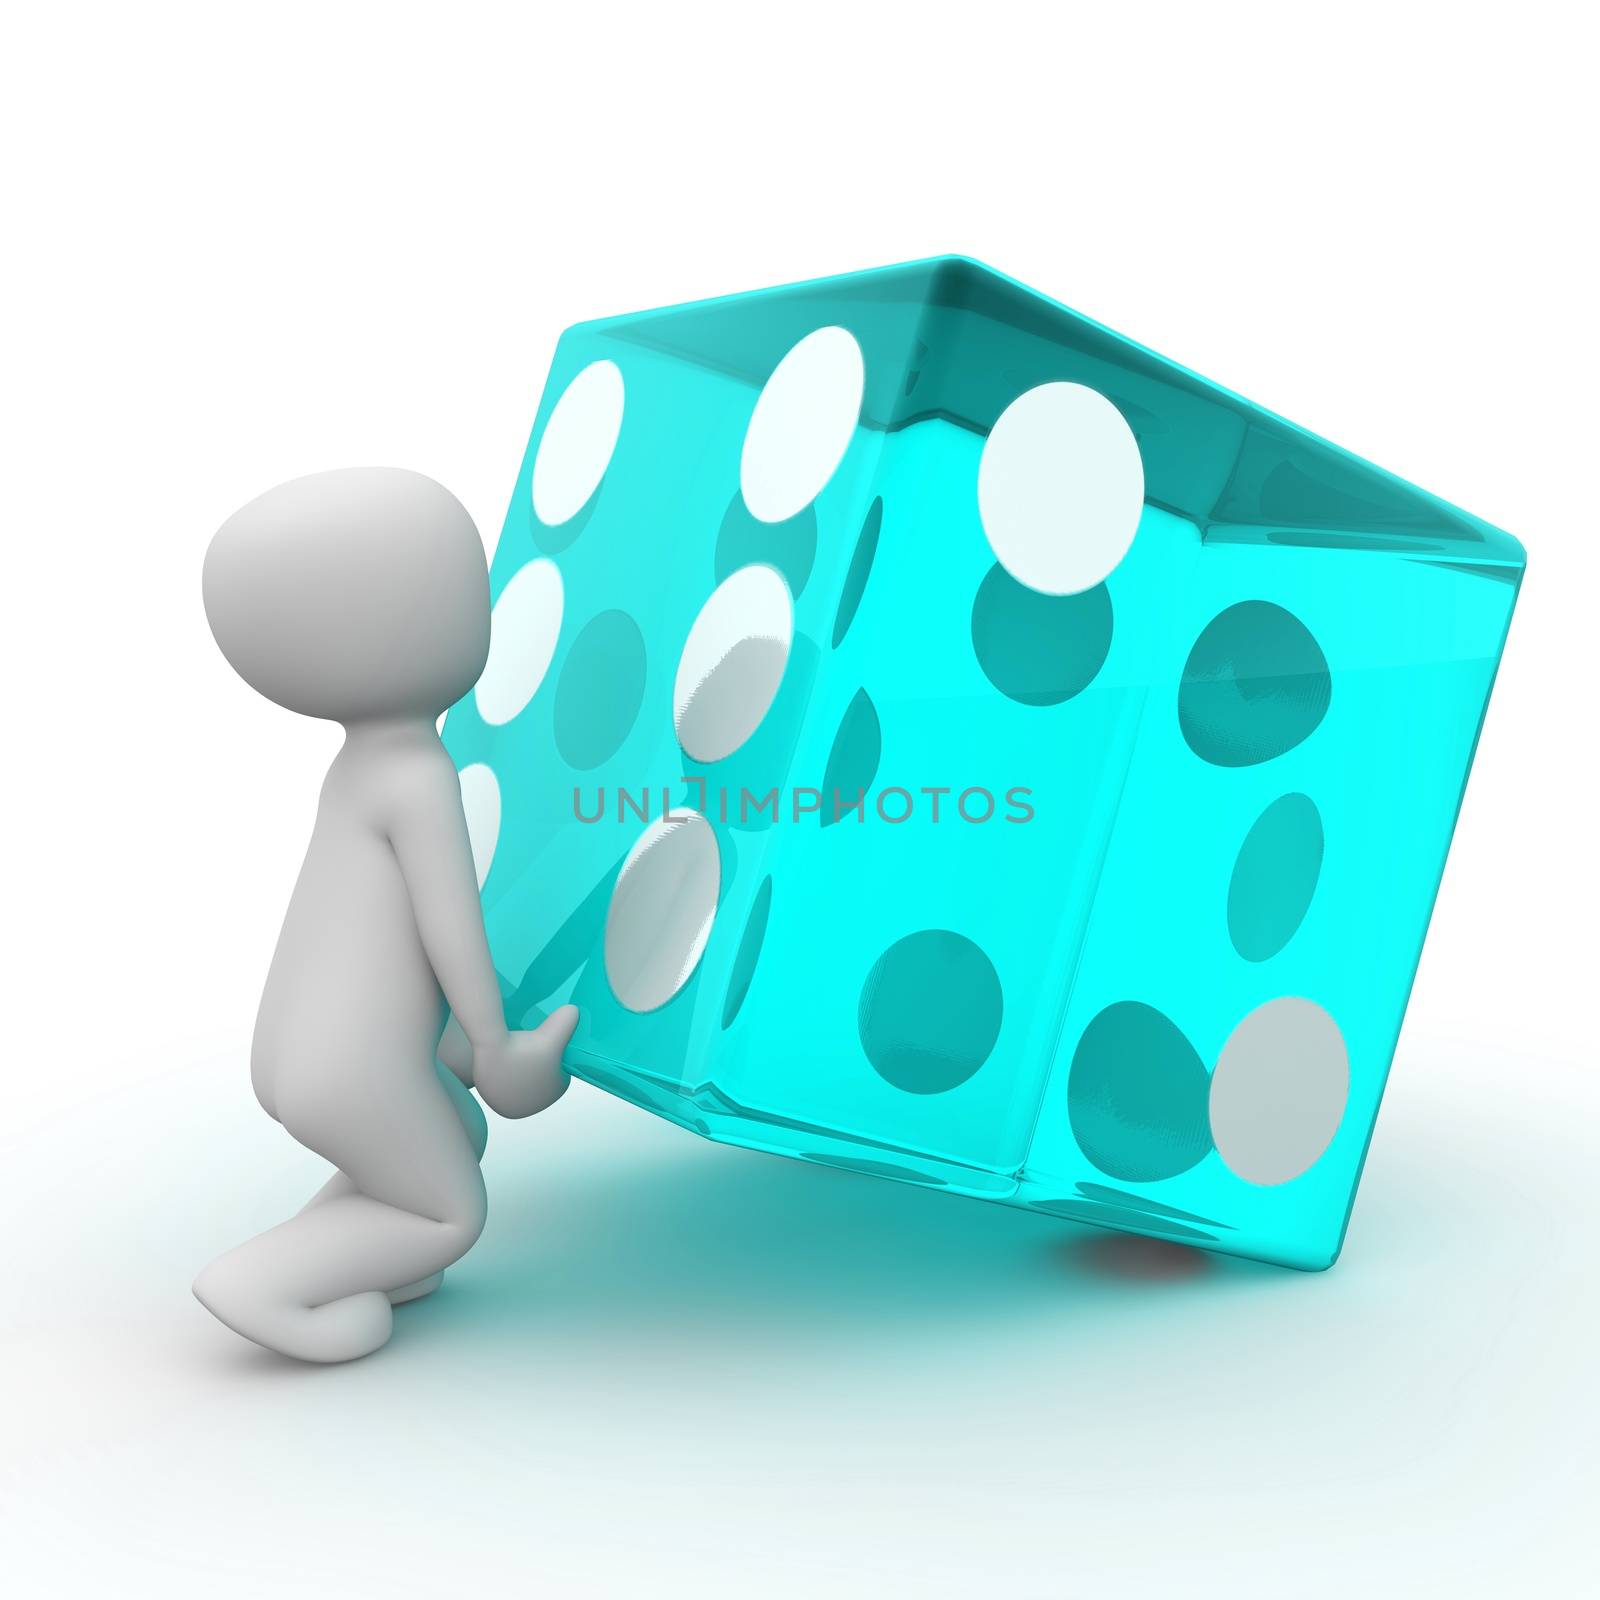 A character tries to lift as large blue cube like himself.